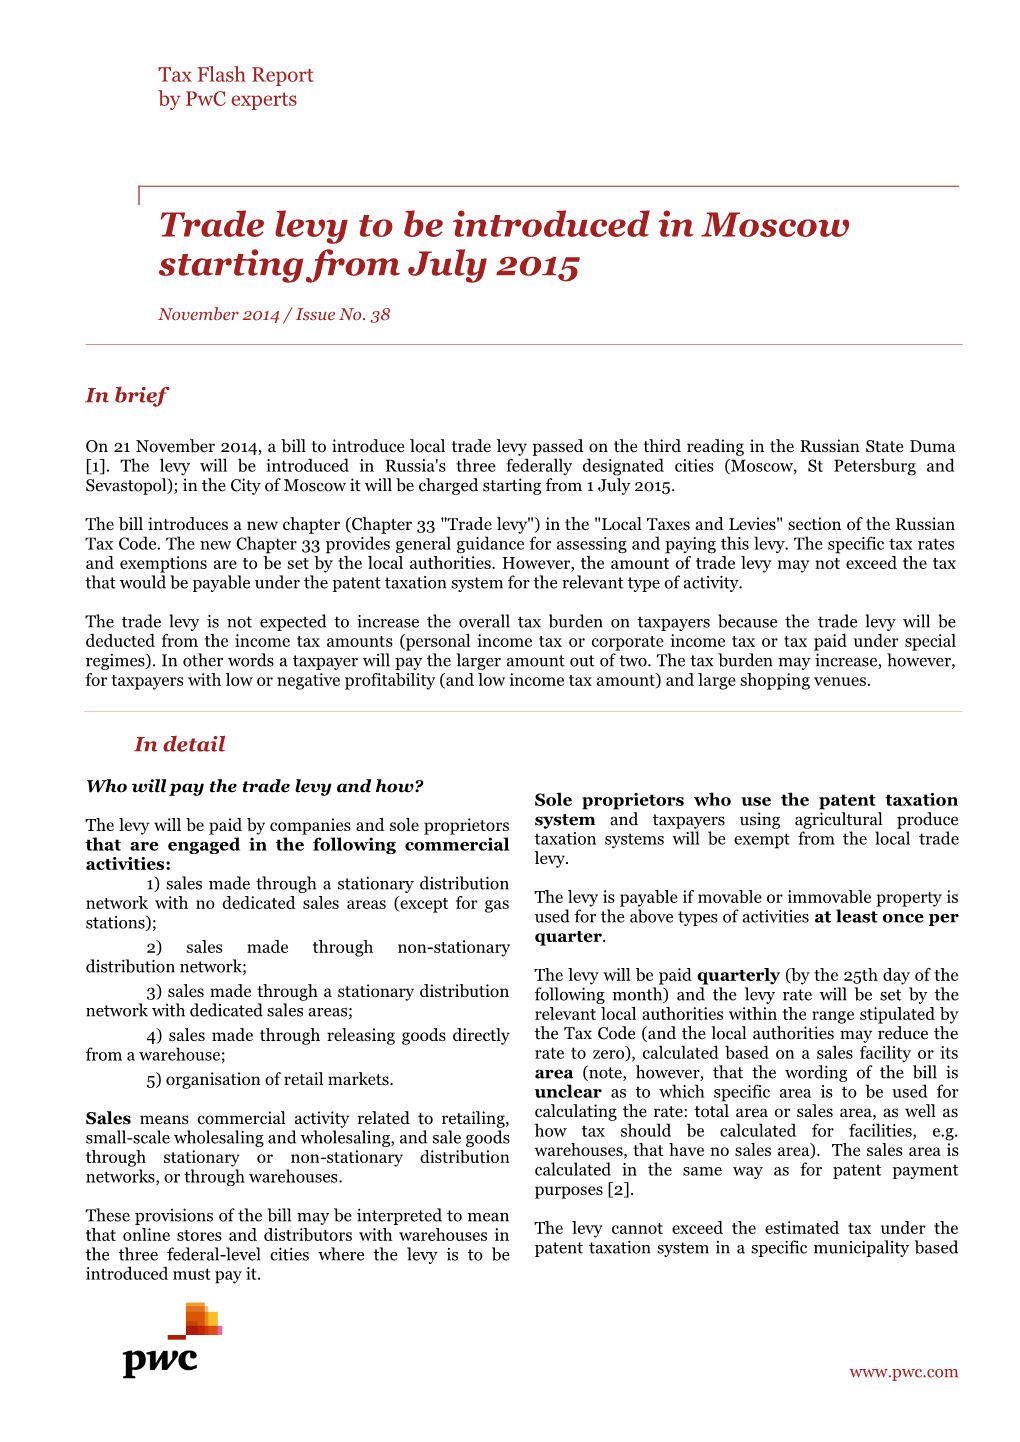 Trade Levy to Be Introduced in Moscow Starting from July 2015